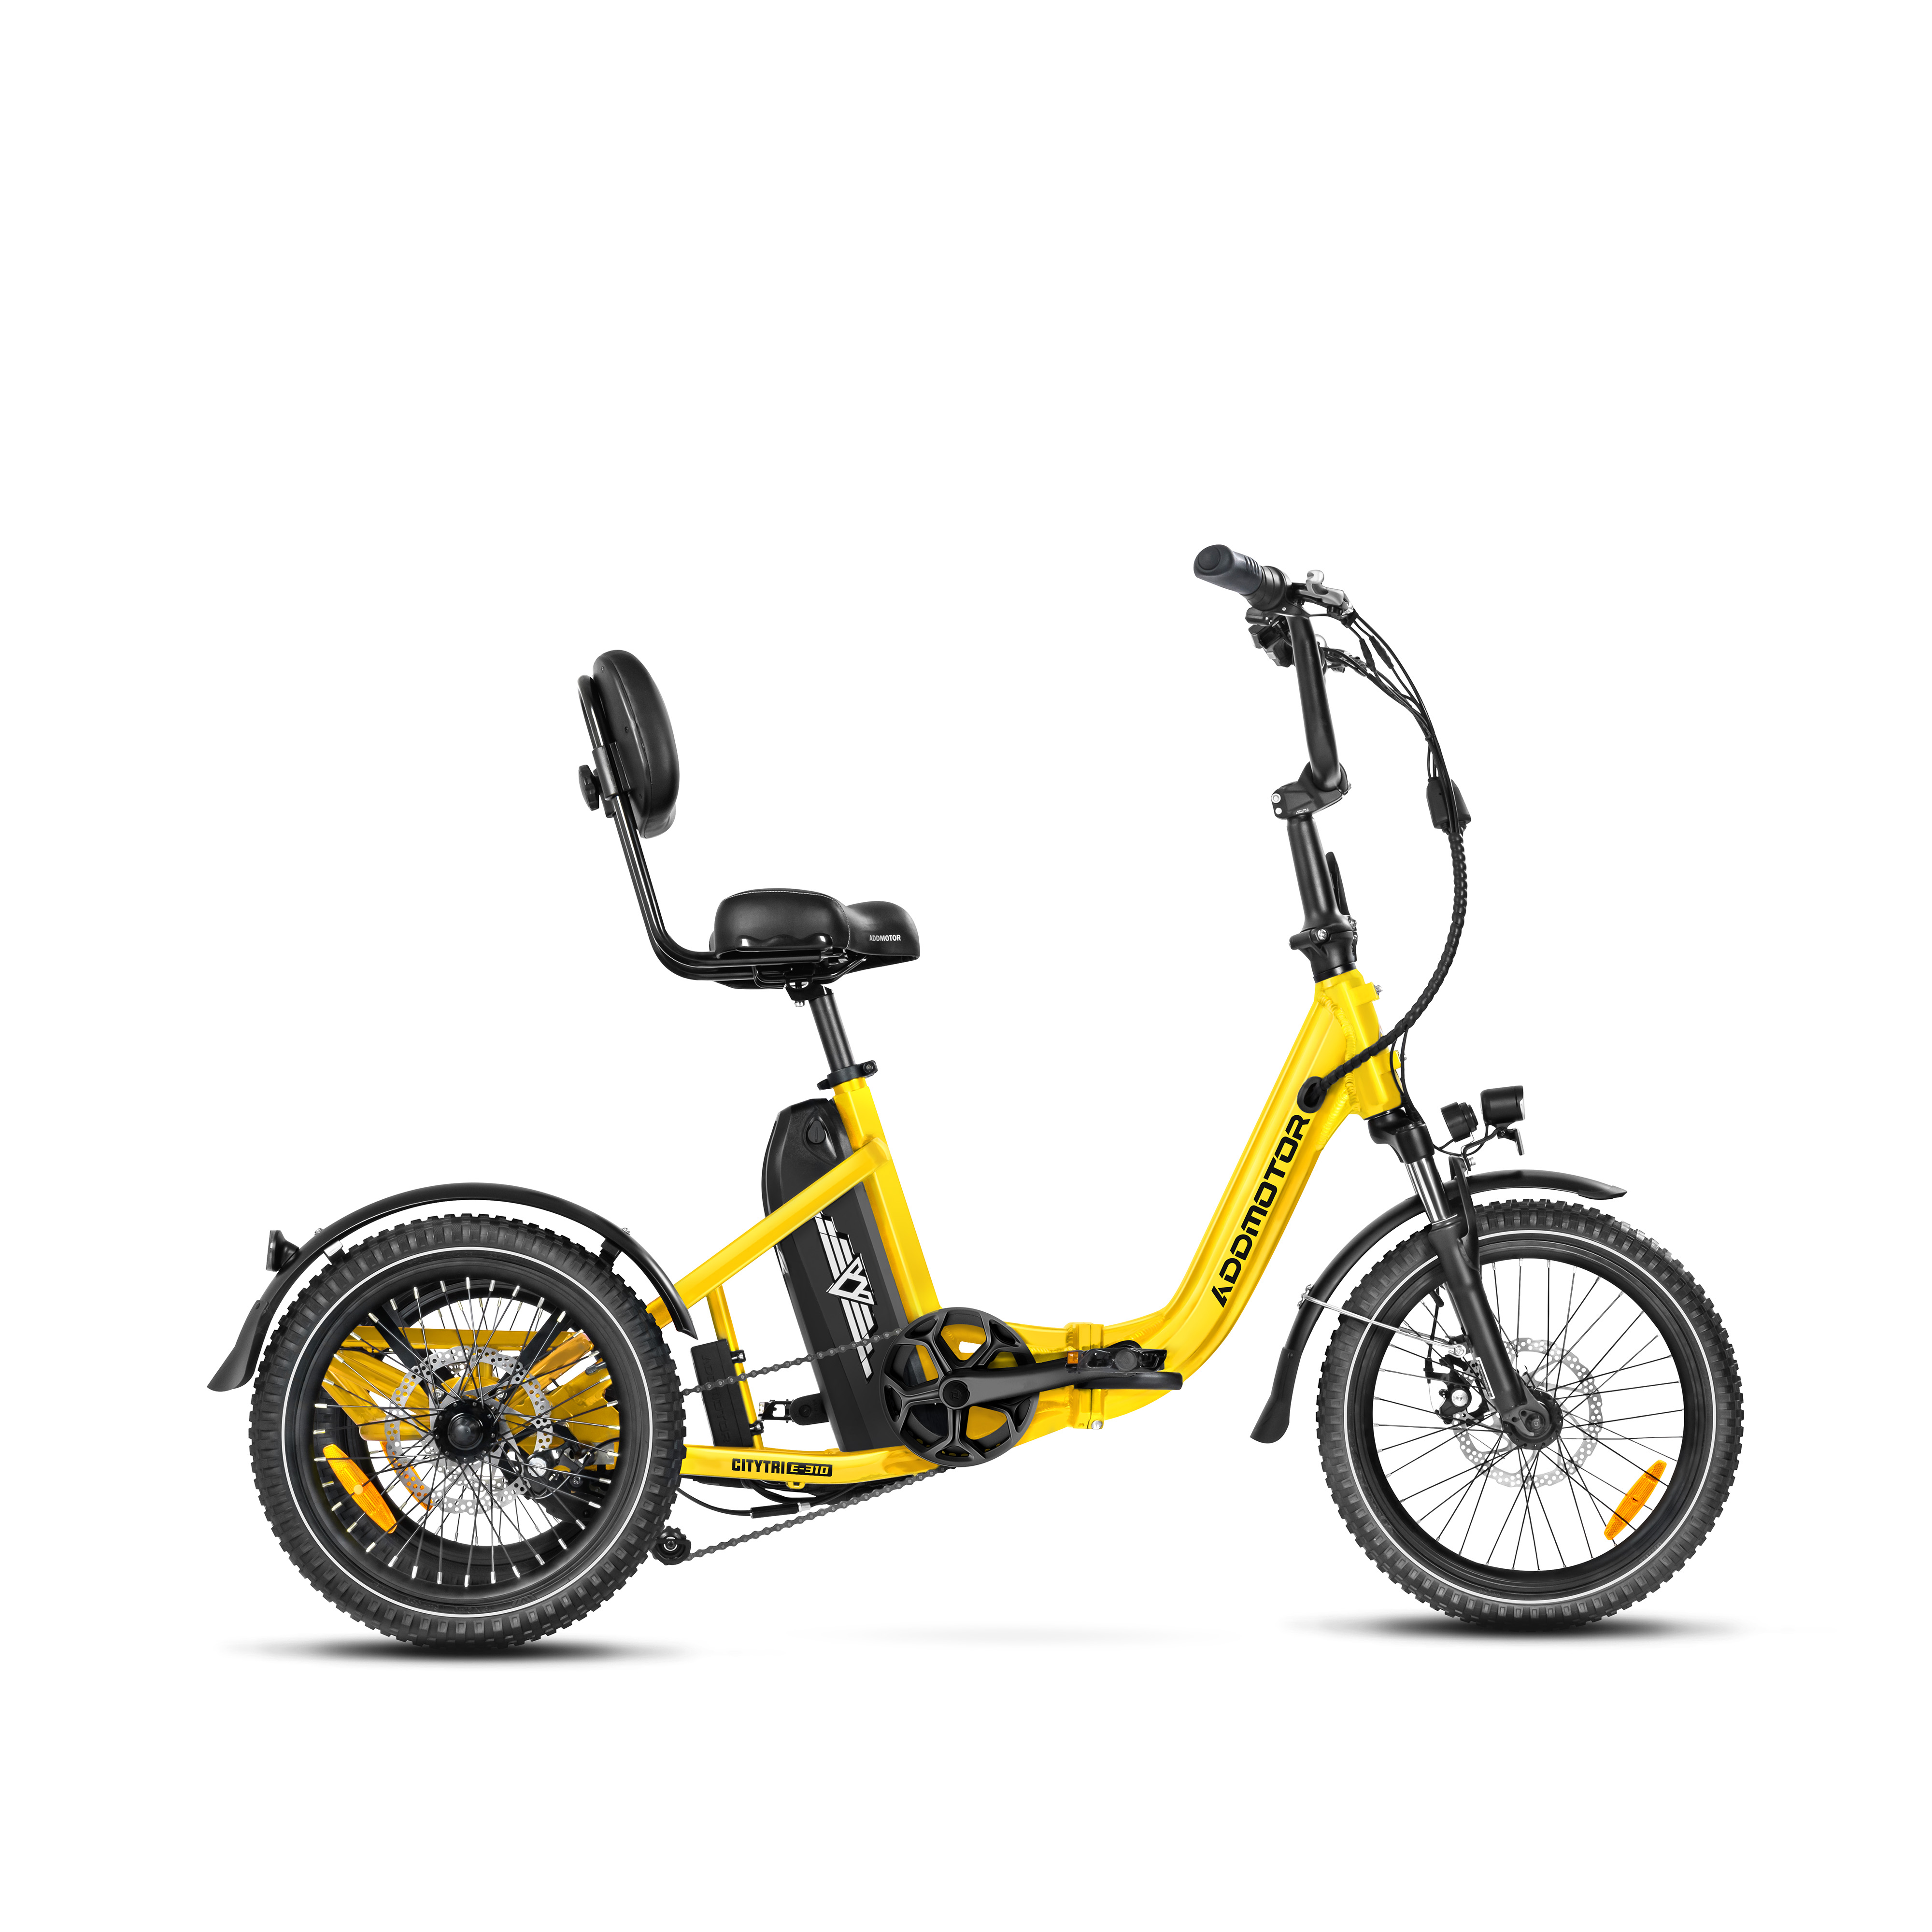 Addmotor Citytri E-310 Mini Electric Trike with 750W 20Ah Best Electric Tricycle Under $2000 Up To 90 Miles - Yellow